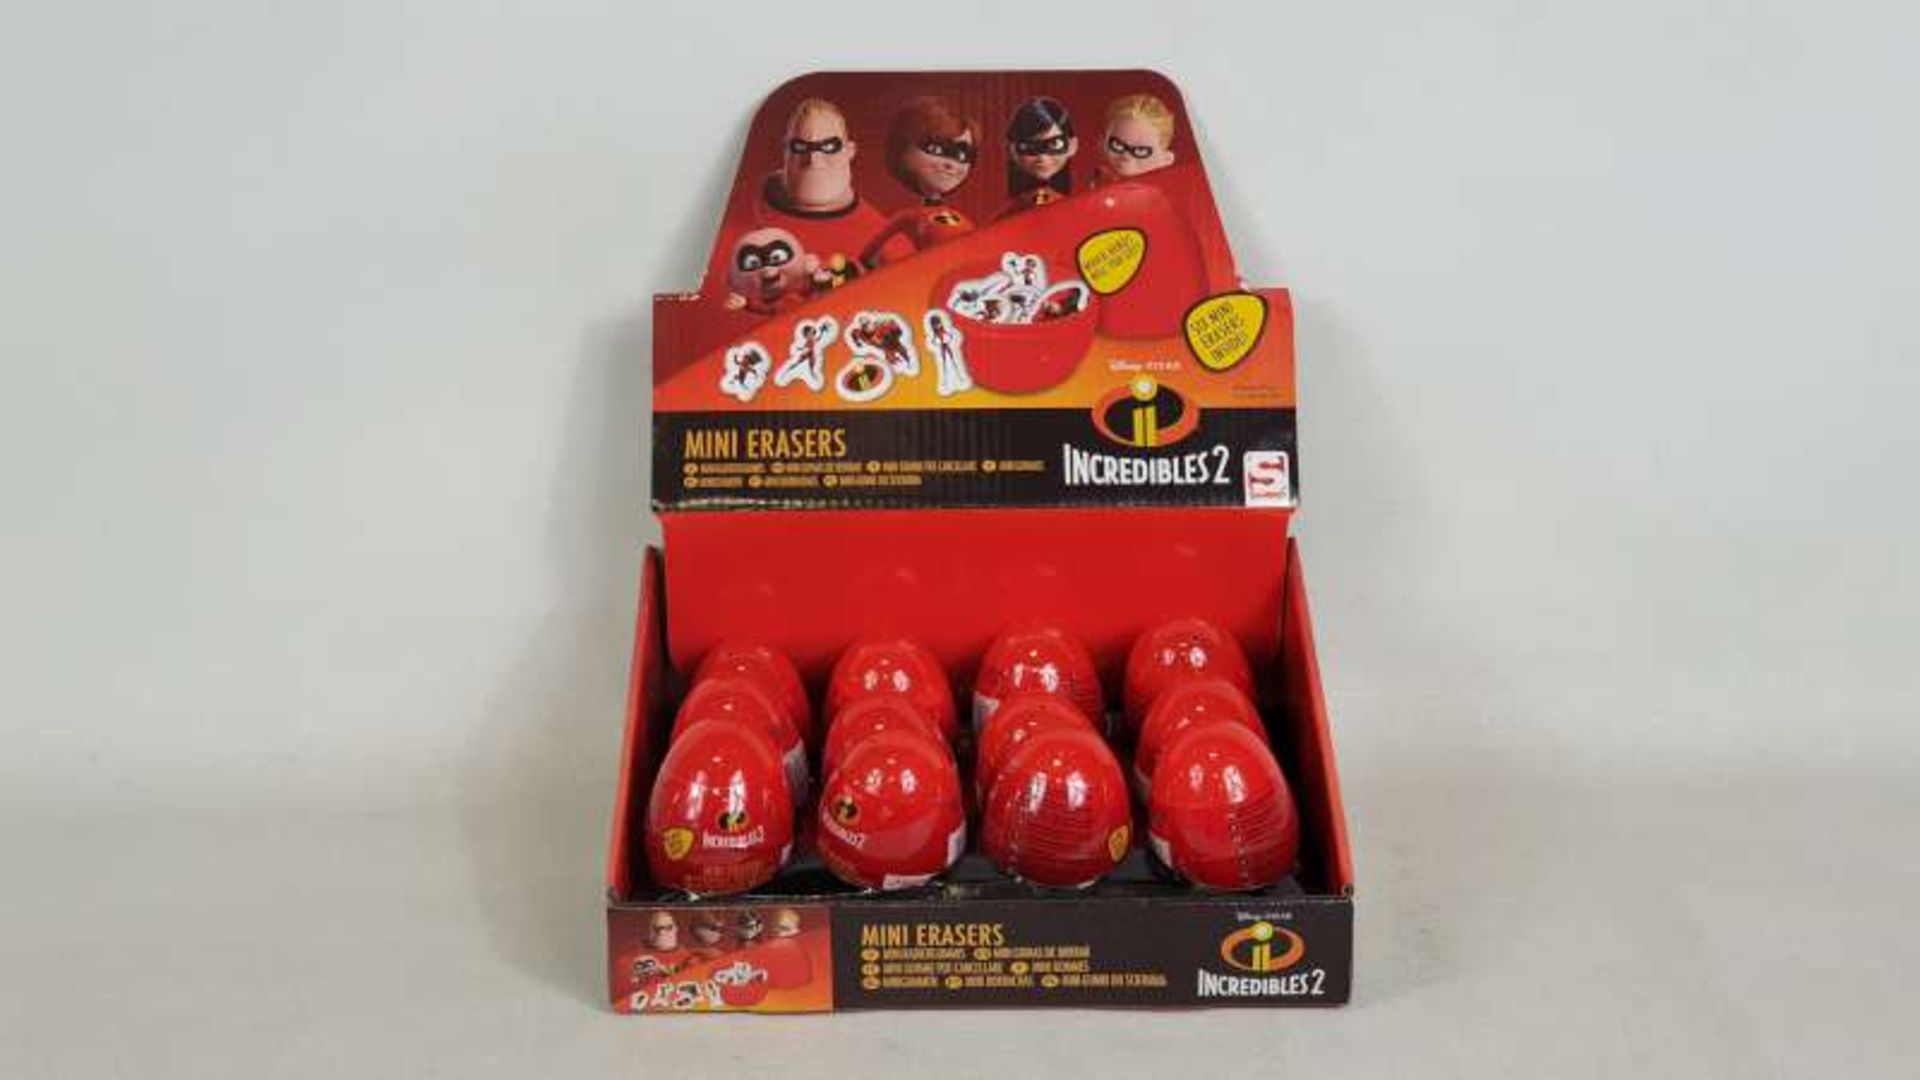 96 X BRAND NEW BOXED INCREDIBLES SECRET EGG FLAT ERASERS IN DISPLAY CASES IN 2 BOXES